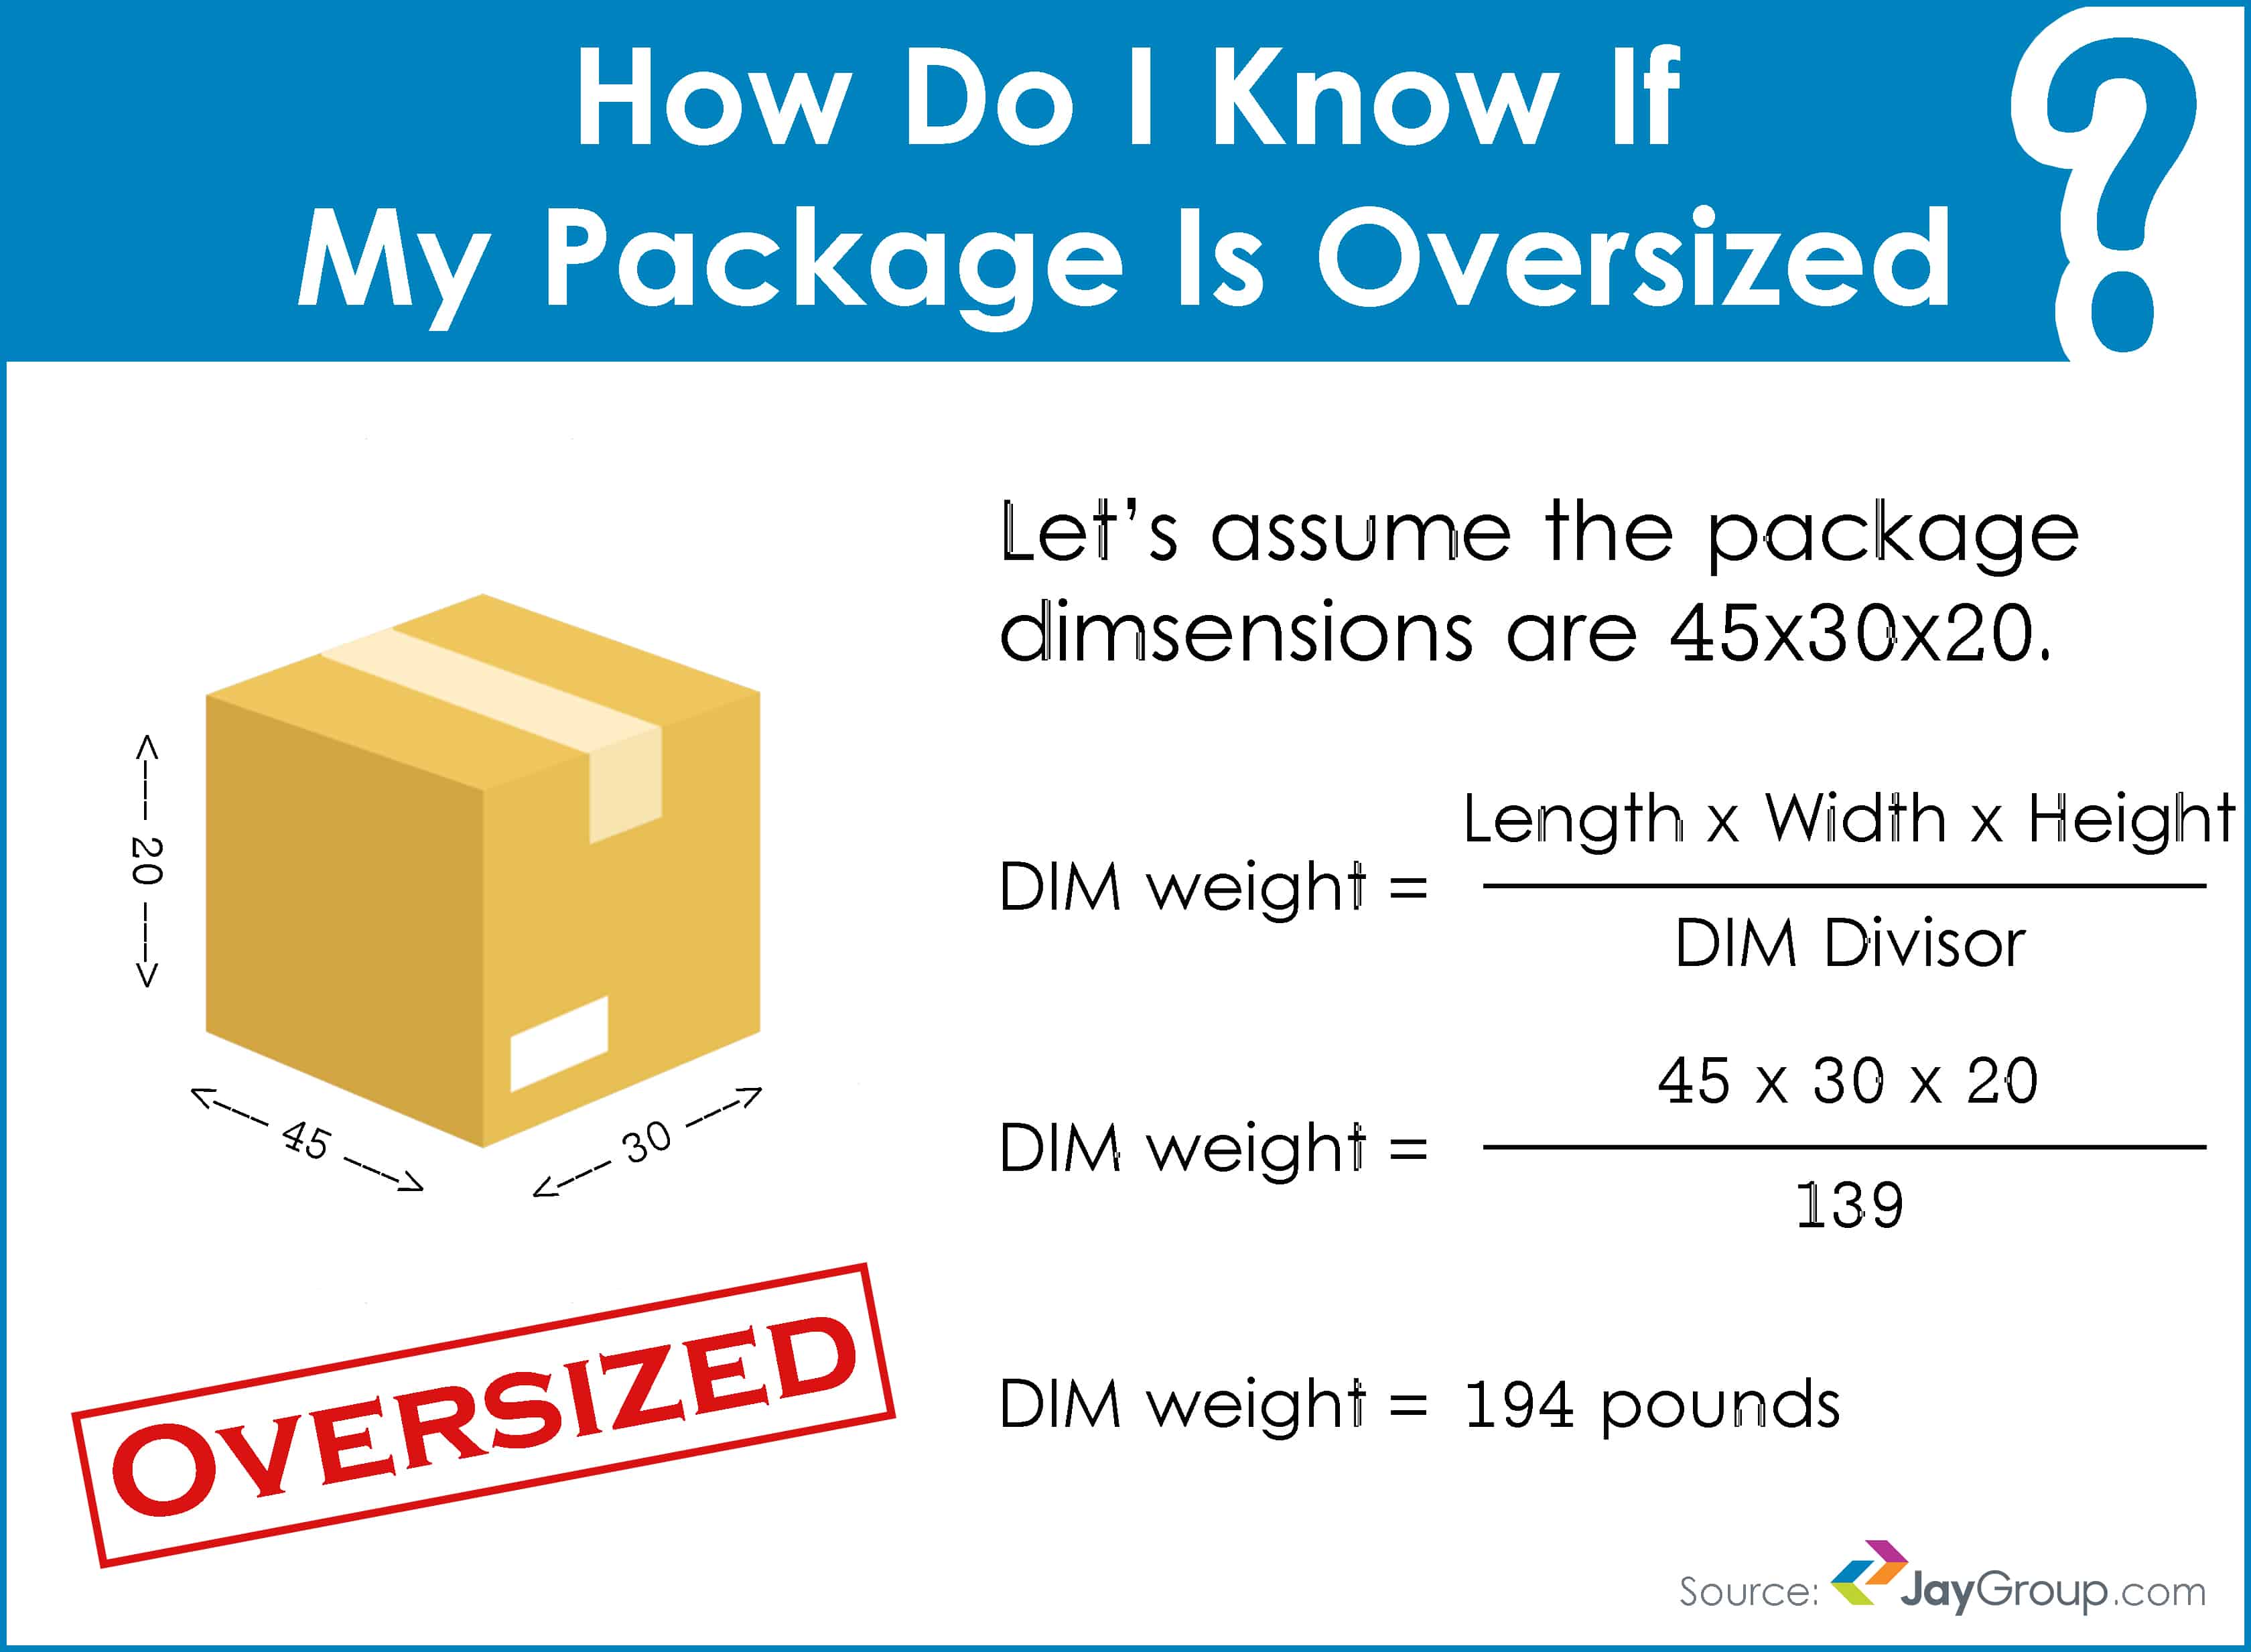 DIM weight is a relatively new measure that the shipping carriers instituted to raise prices for large, yet light packages.